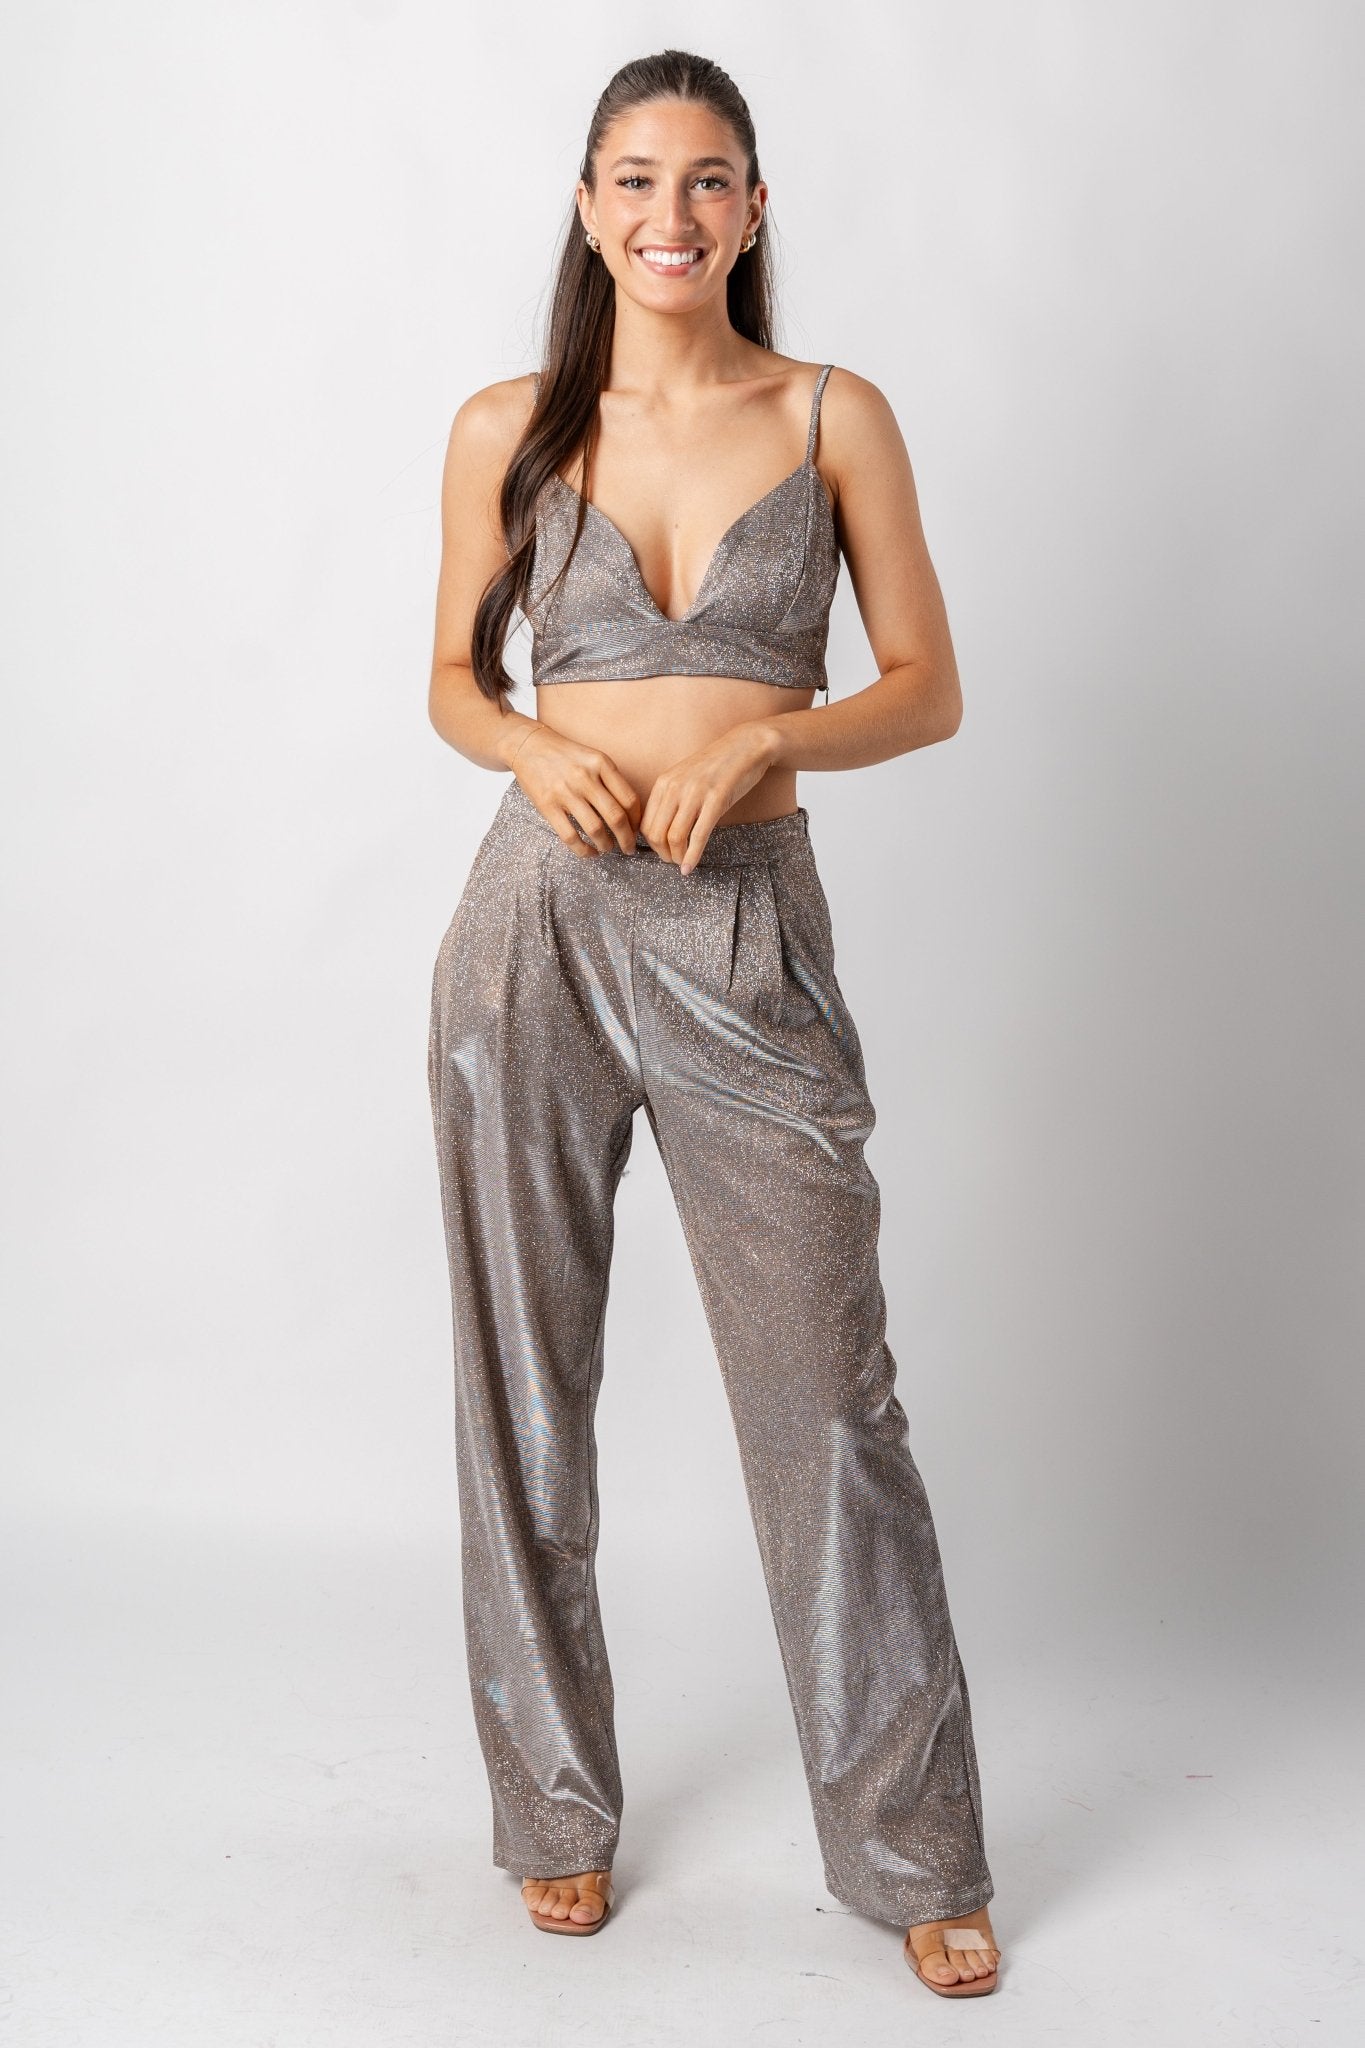 Glitter bralette top tan/silver - Trendy New Year's Eve Dresses, Skirts, Kimonos and Sequins at Lush Fashion Lounge Boutique in Oklahoma City